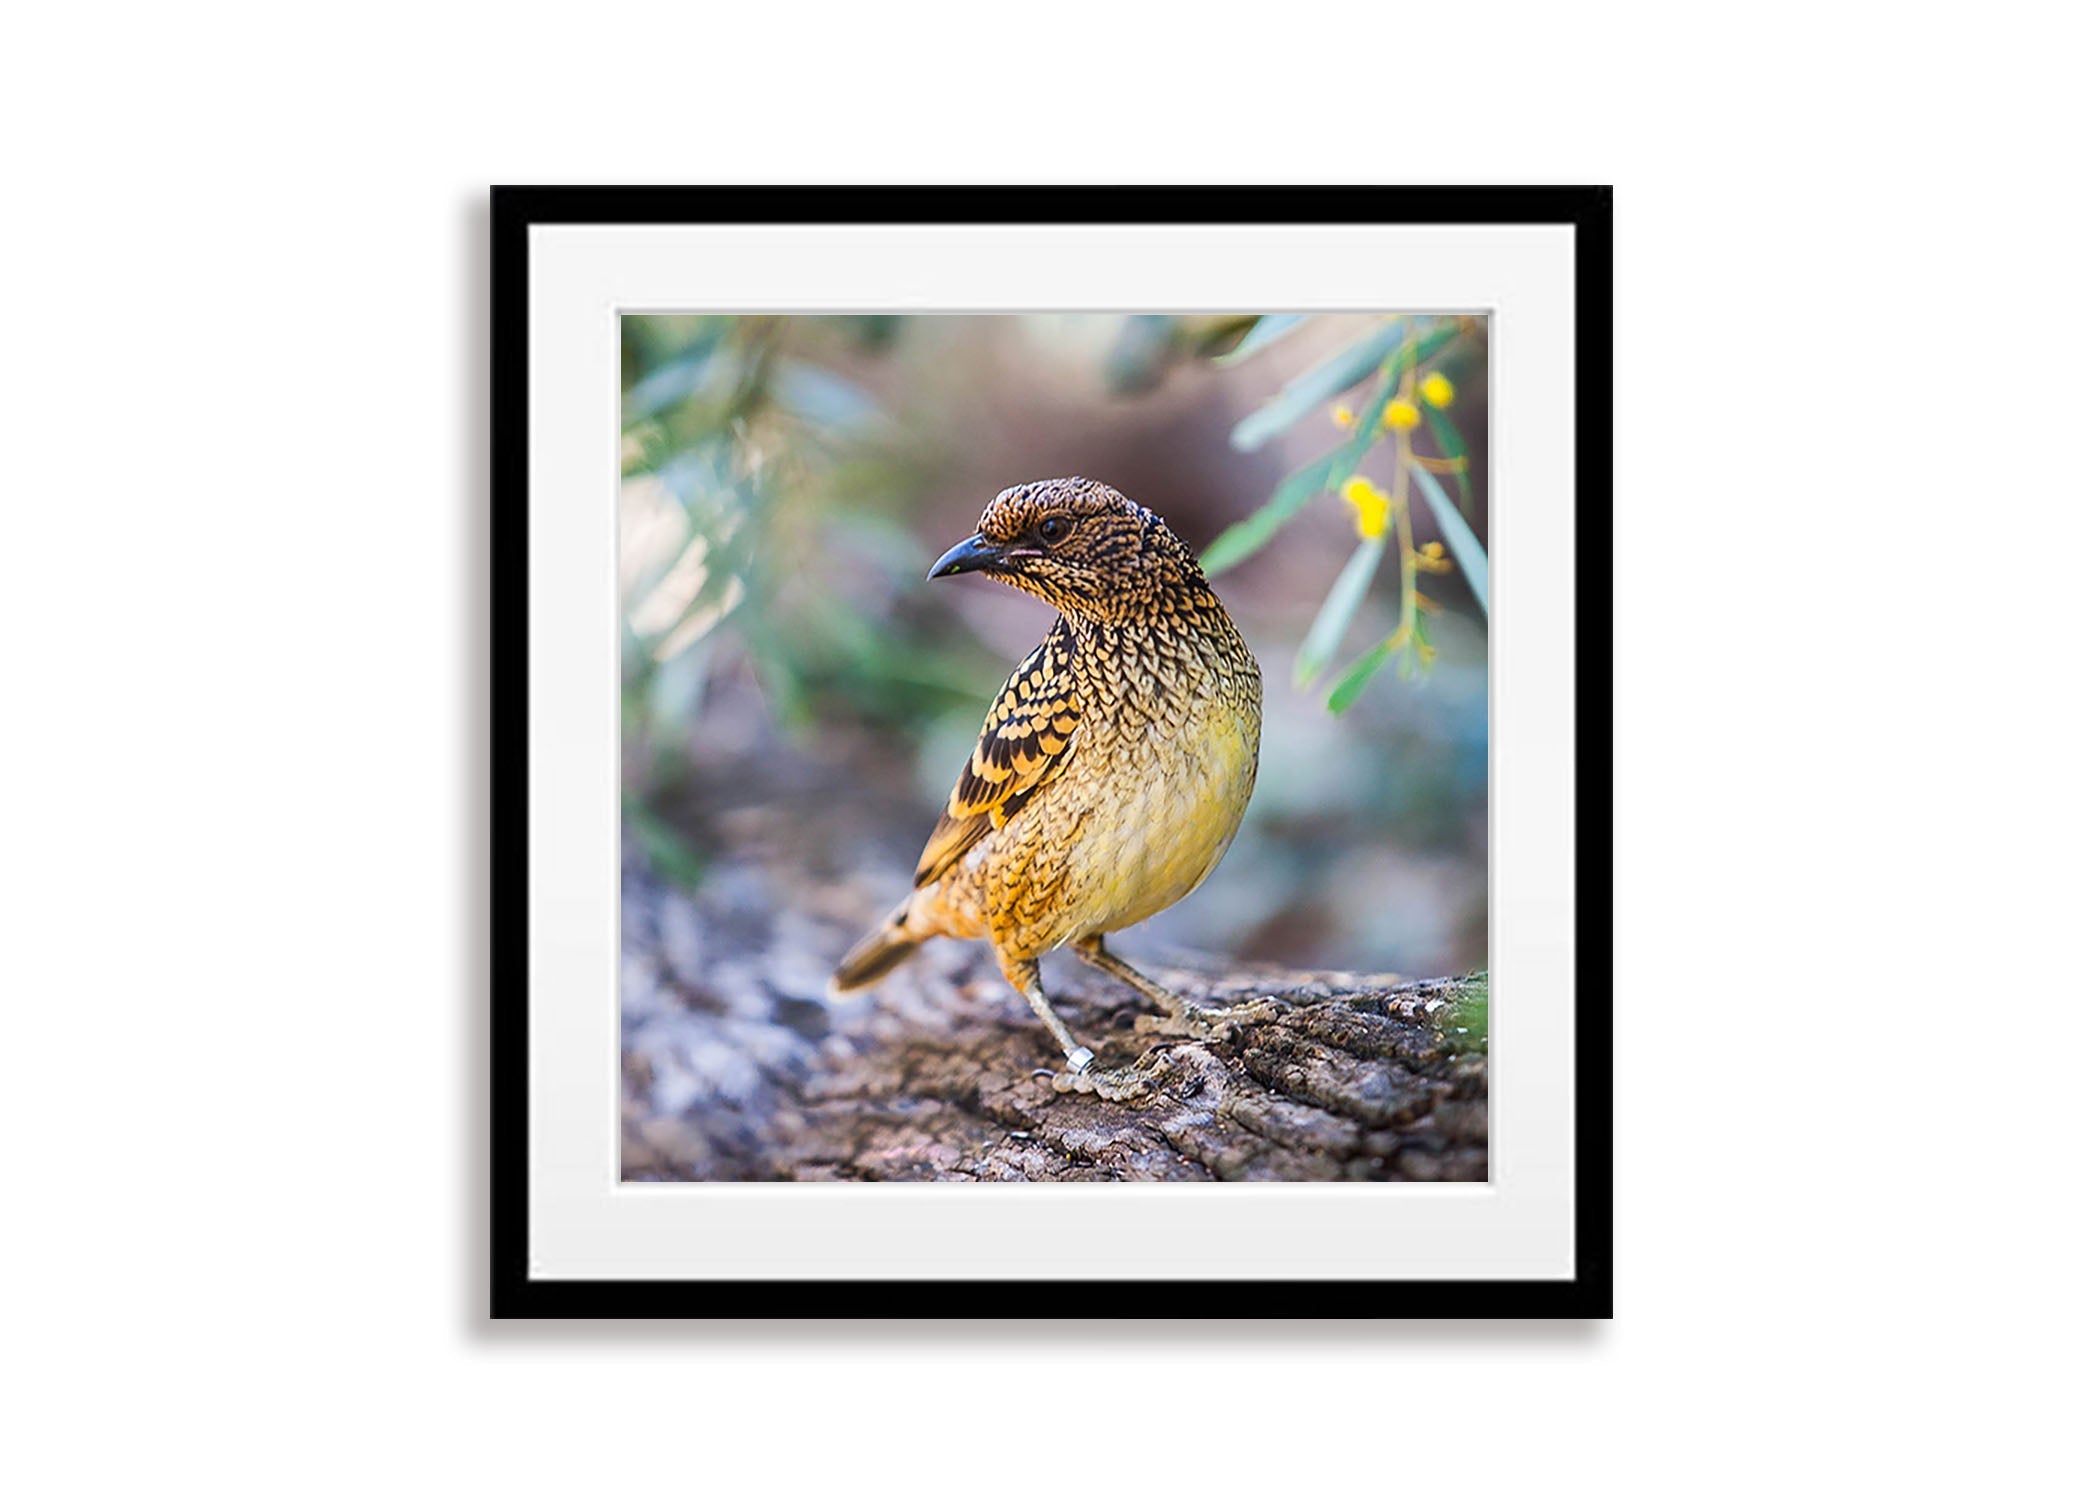 Spotted Bowerbird, West MacDonnell Ranges - Northern Territory